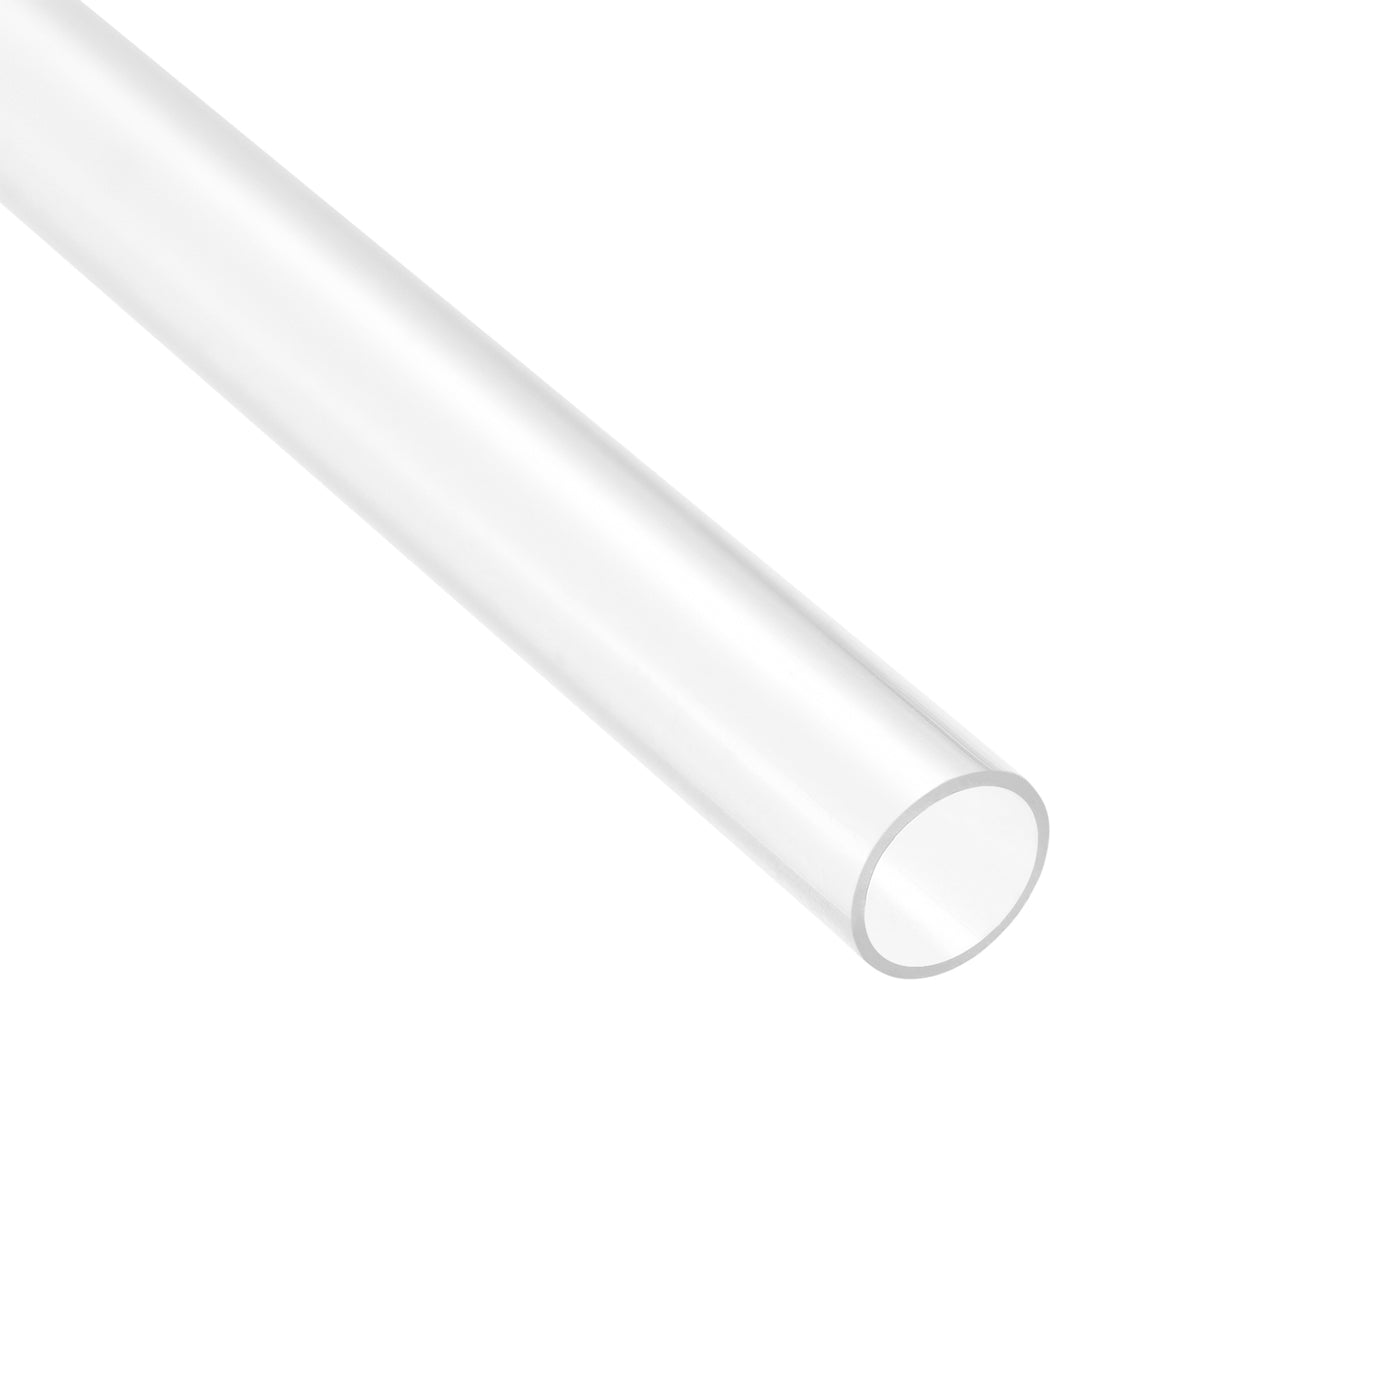 Uxcell Uxcell PC Rigid Round Clear Tubing 10mm(0.4 Inch)IDx12mm(0.47 Inch)ODx500mm(1.64Ft) Length Plastic Tube 2pcs